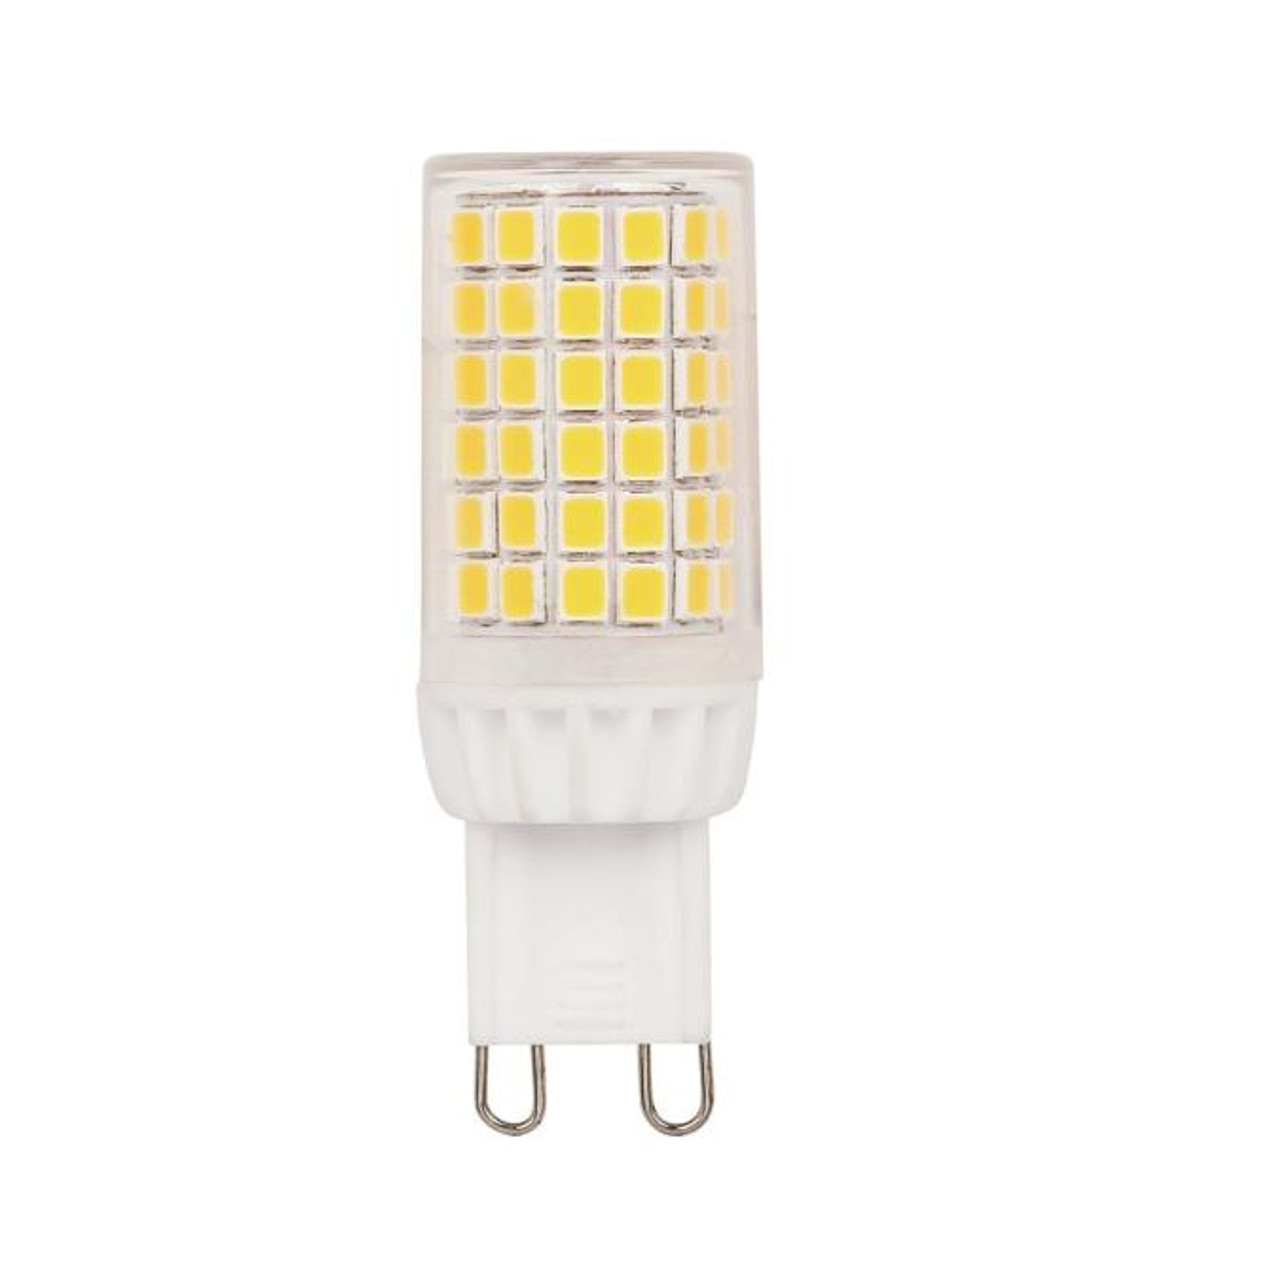 Dimmable LED G9 Light Bulb Supplier and Manufacturer